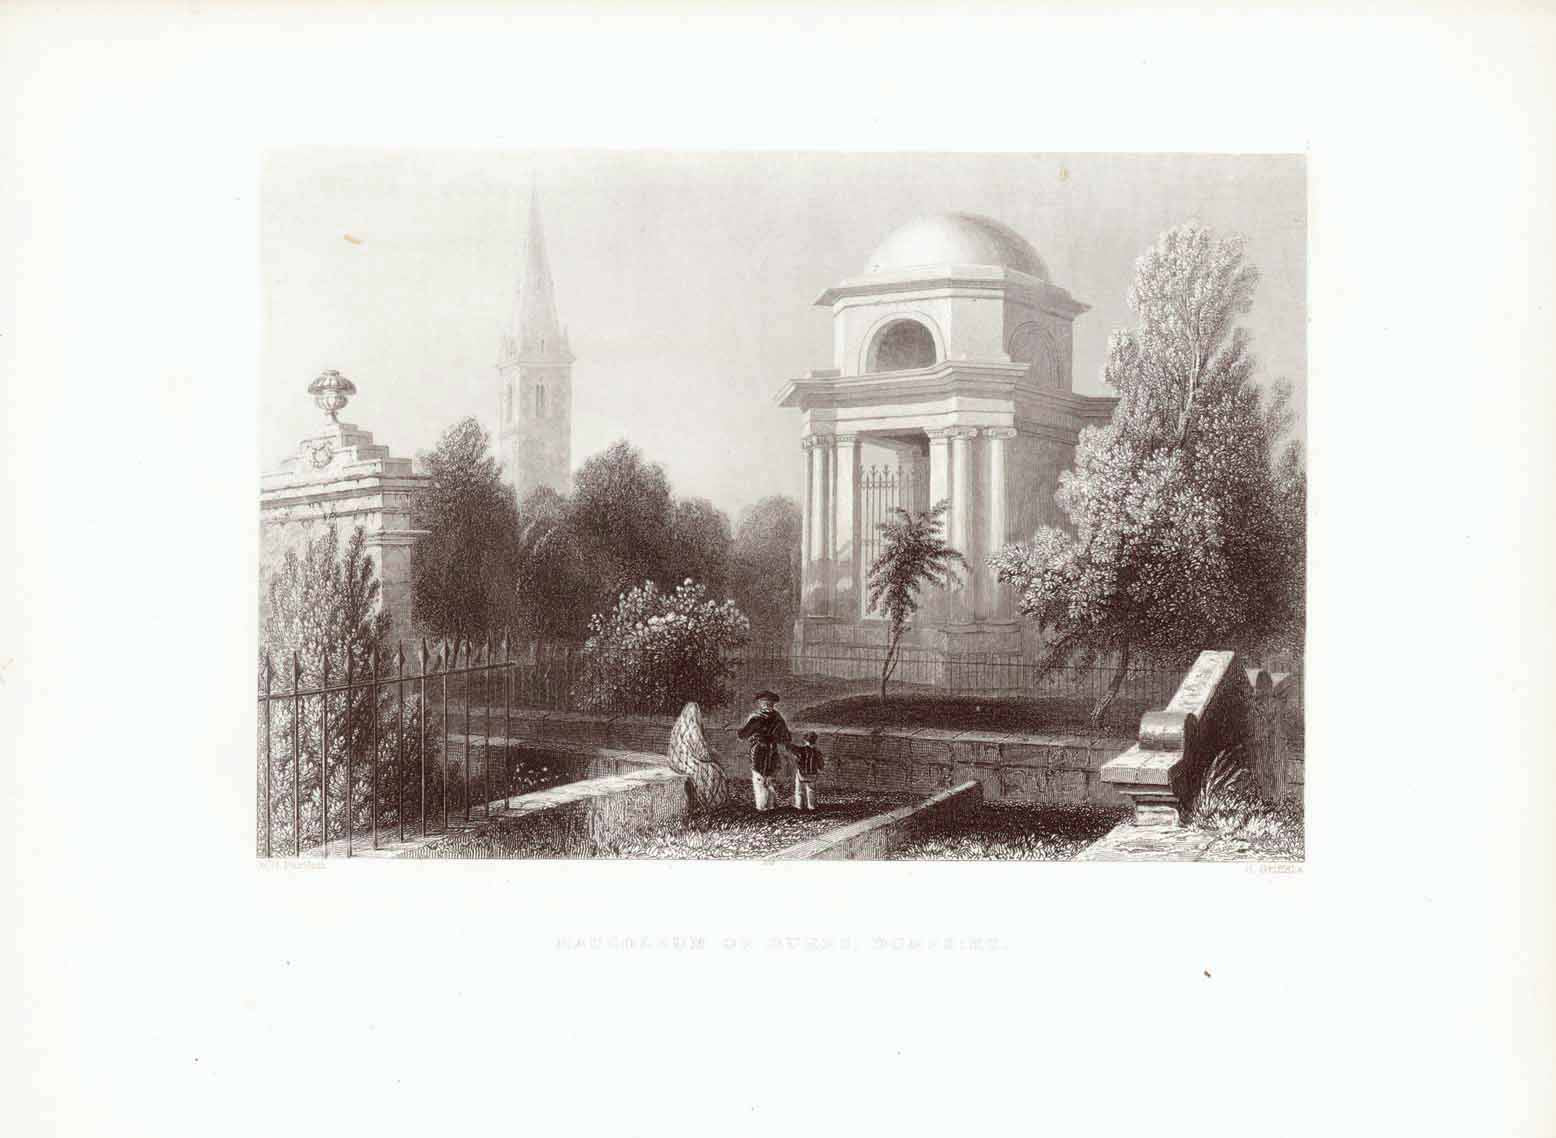 "Mausoleum of Burns, Dumfries"  Steel engraving by H. Griffith after W. H. Bartlett ca 1850.